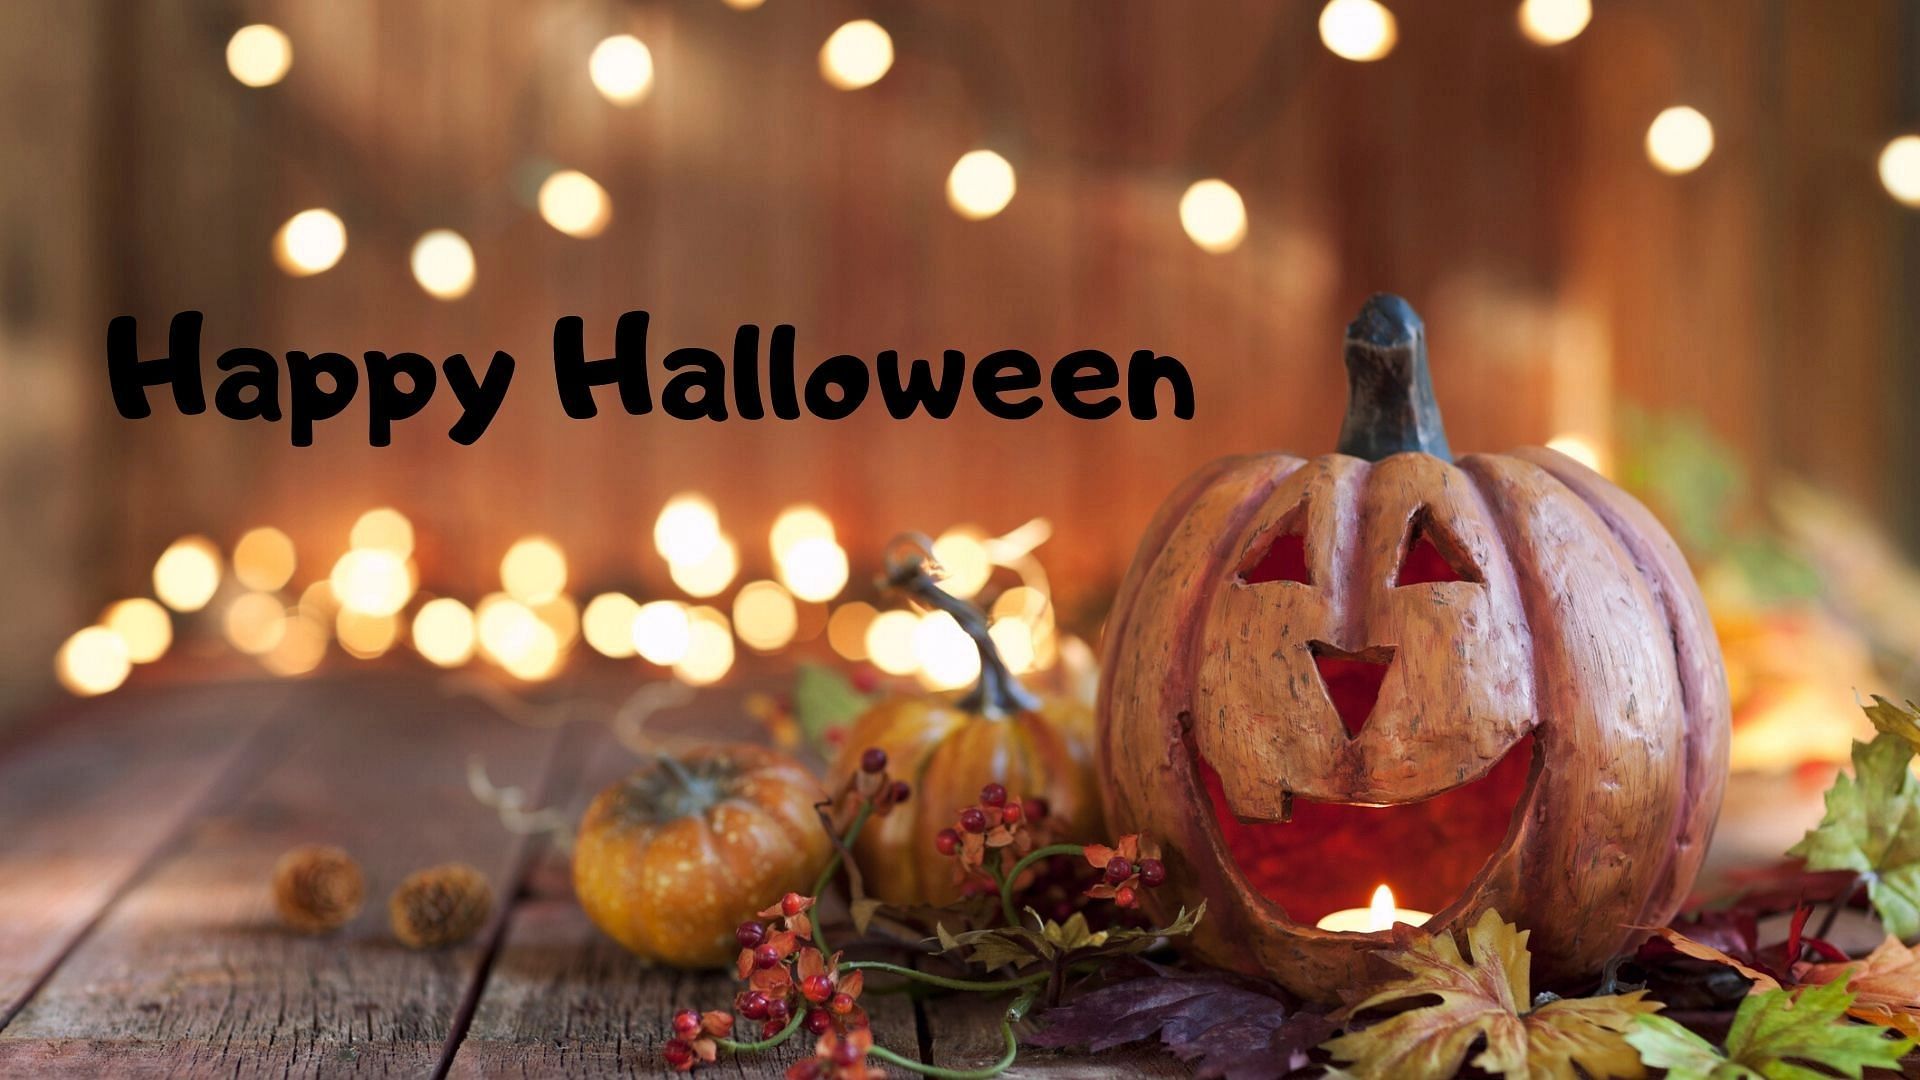 Happy Halloween 2022 Wishes, Quotes, Images, Greetings, Messages